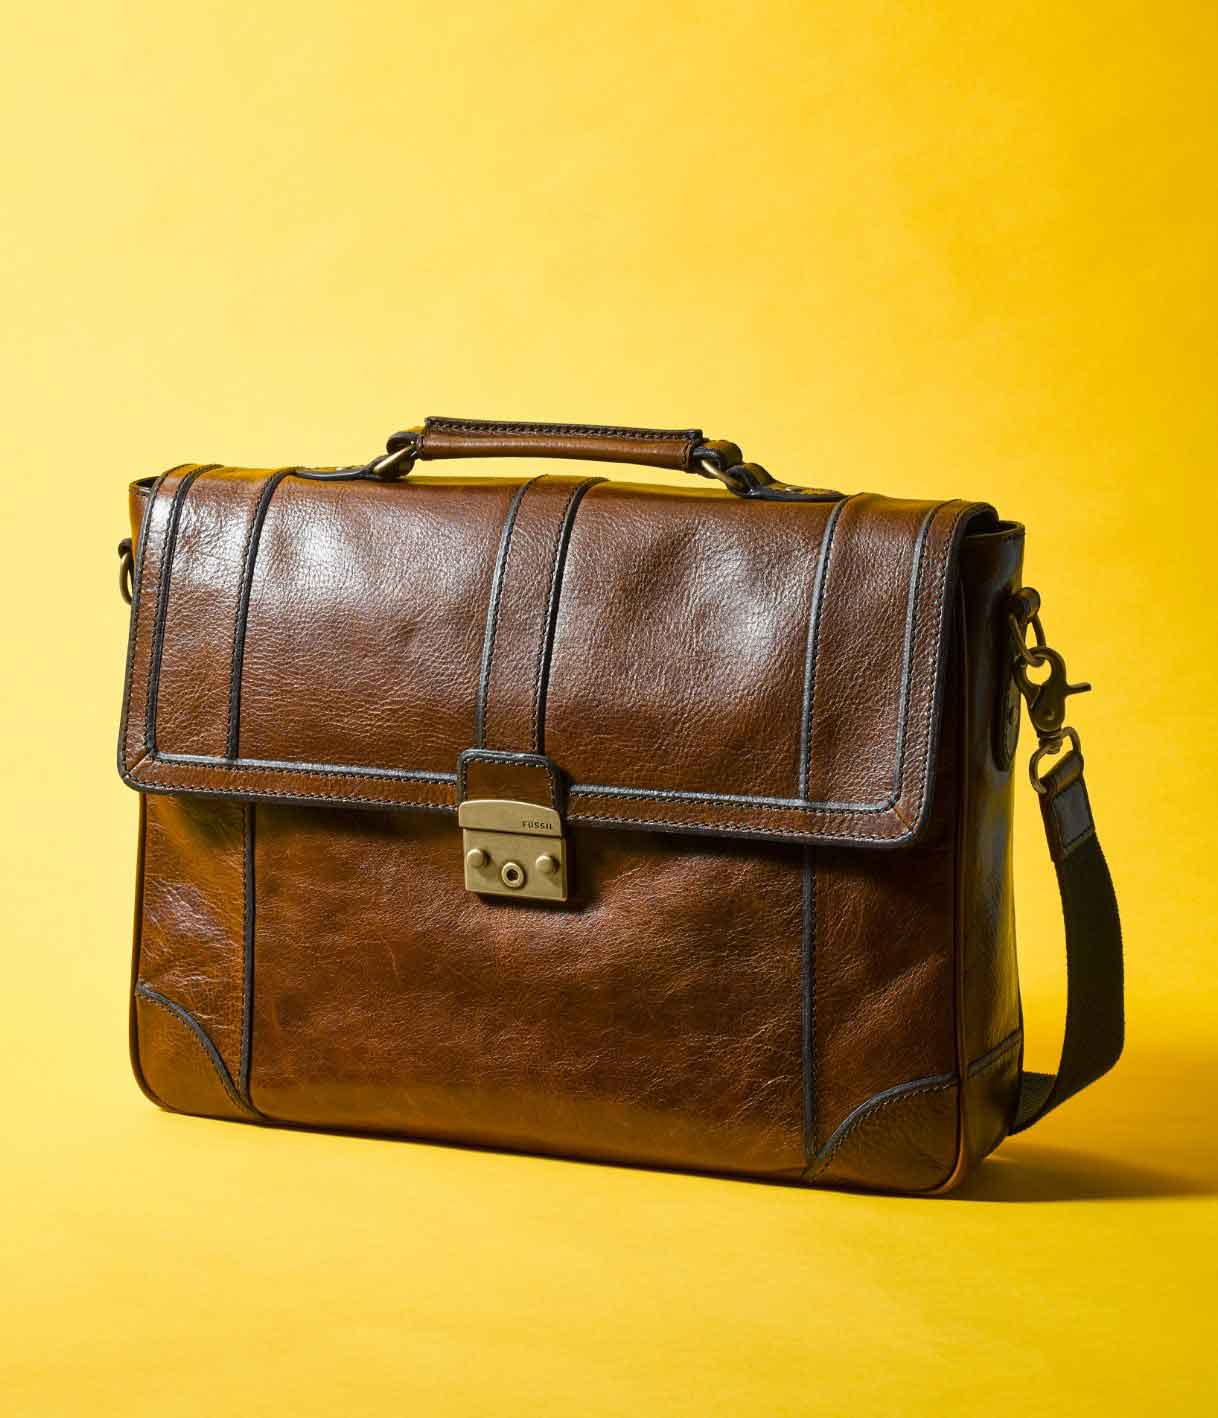 Lineage messenger in leather.